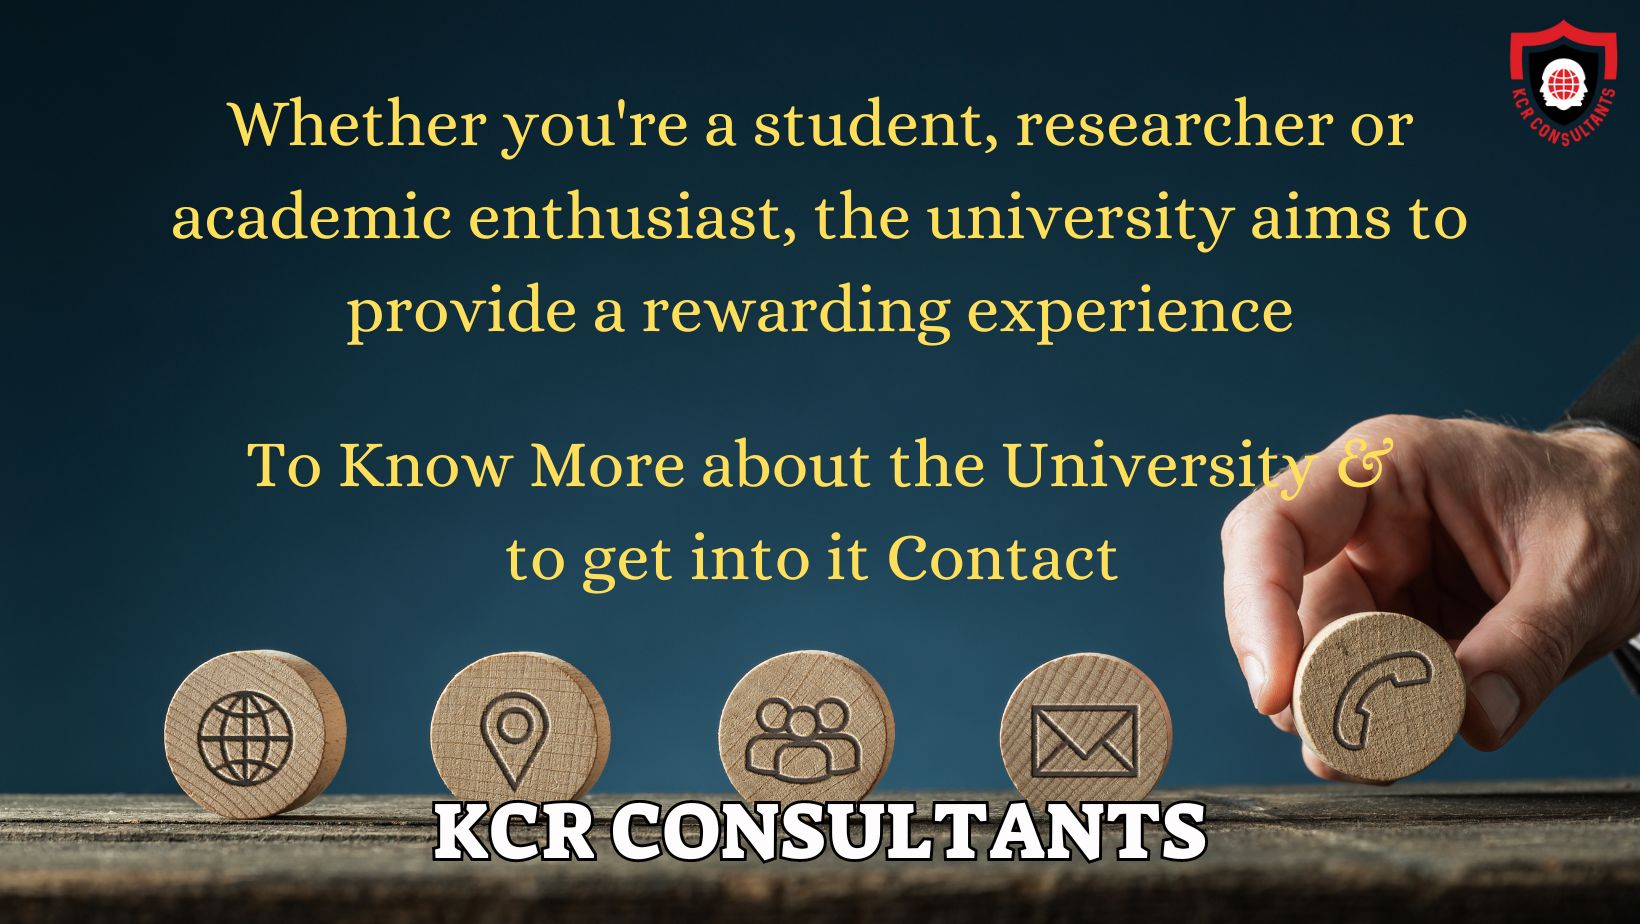 COLOGNE UNIVERSITY OF APPLIED SCIENCES - KCR CONSULTANTS - Contact us